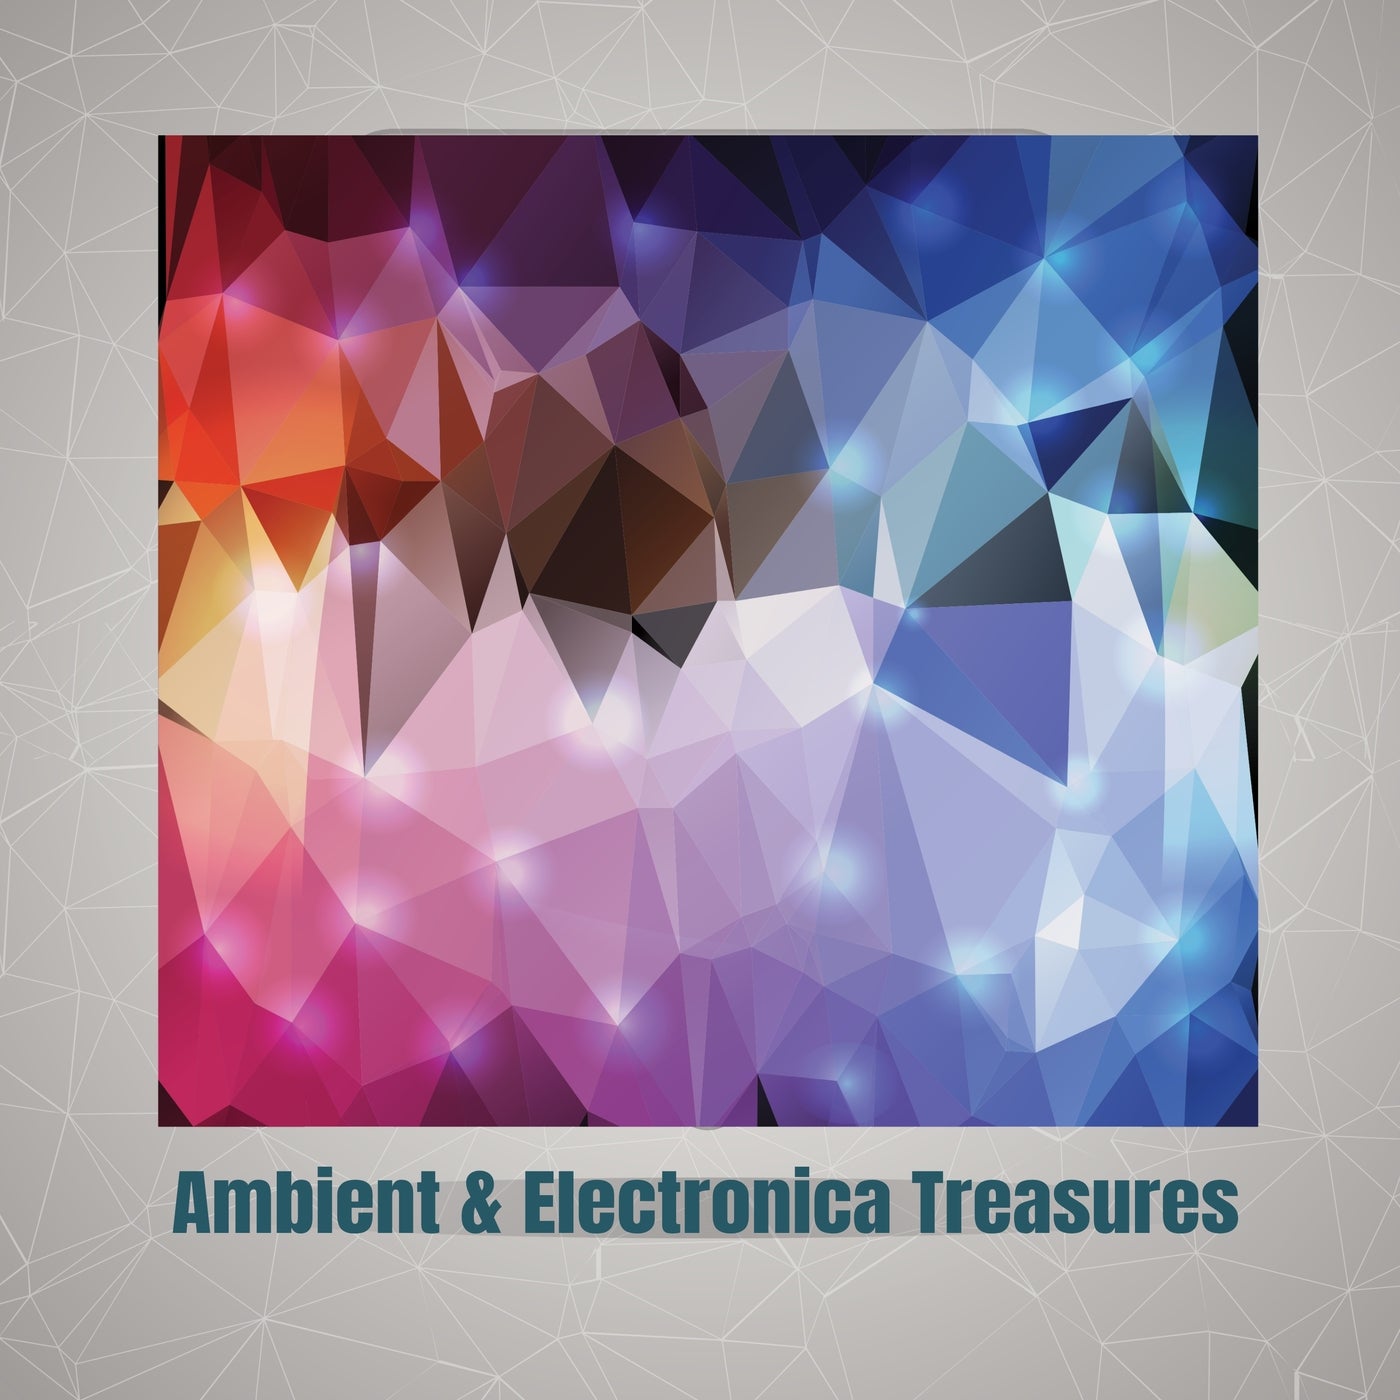 Ambient & Electronica Treasures